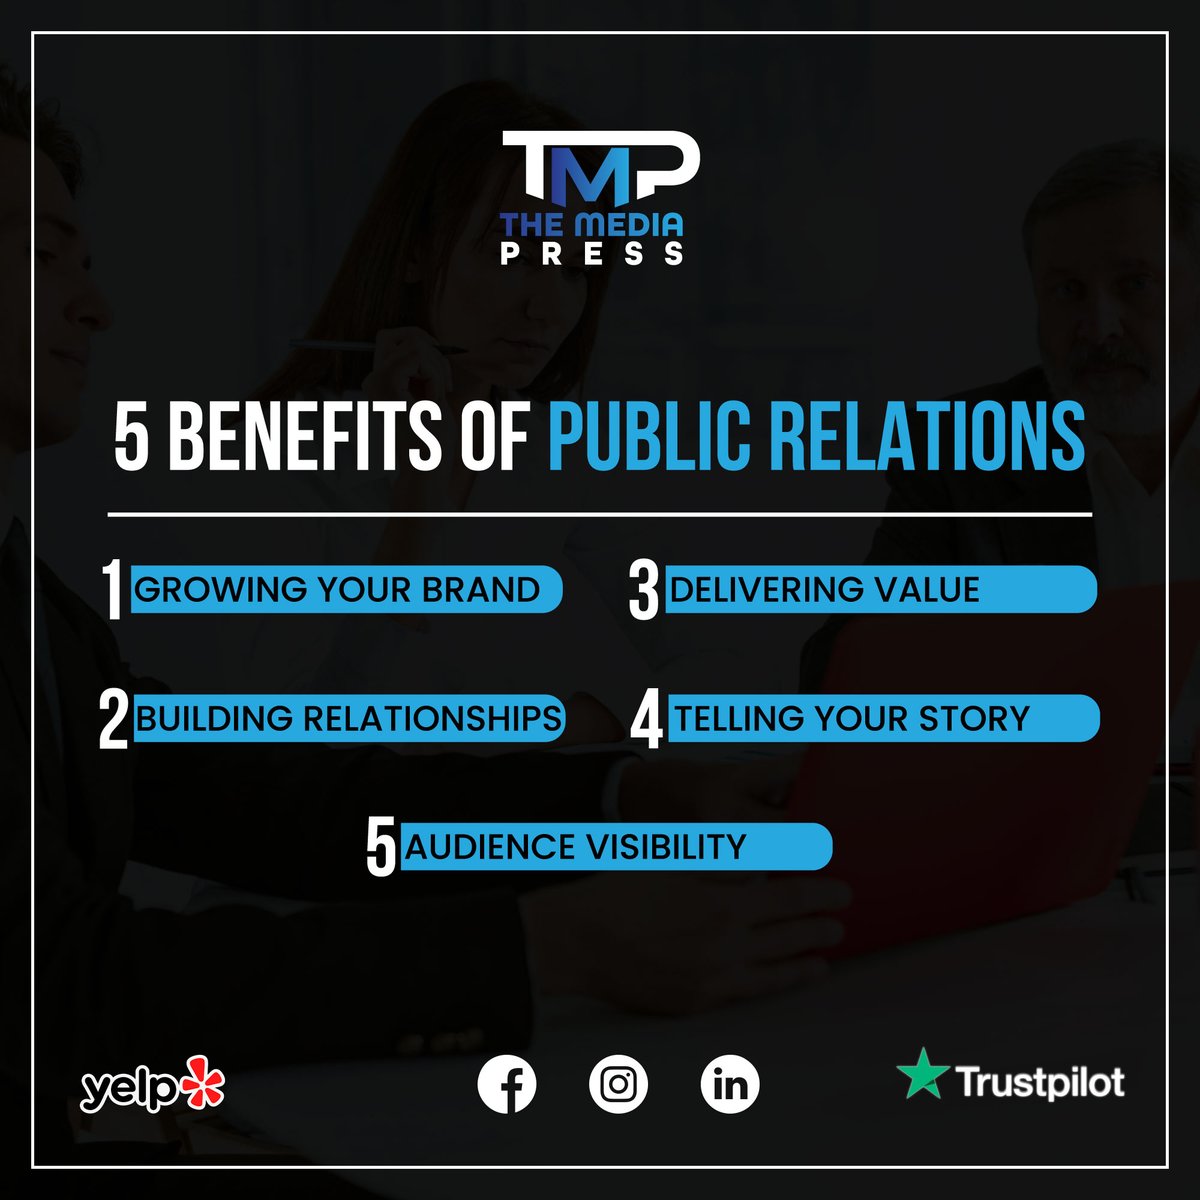 Public relations build trust, enhance reputation, and foster positive connections—key elements for brand success and lasting relationships with stakeholders.'

#PRBenefits #TrustBuilding #ReputationManagement #PositiveConnections #BrandSuccess #StakeholderRelations #Media